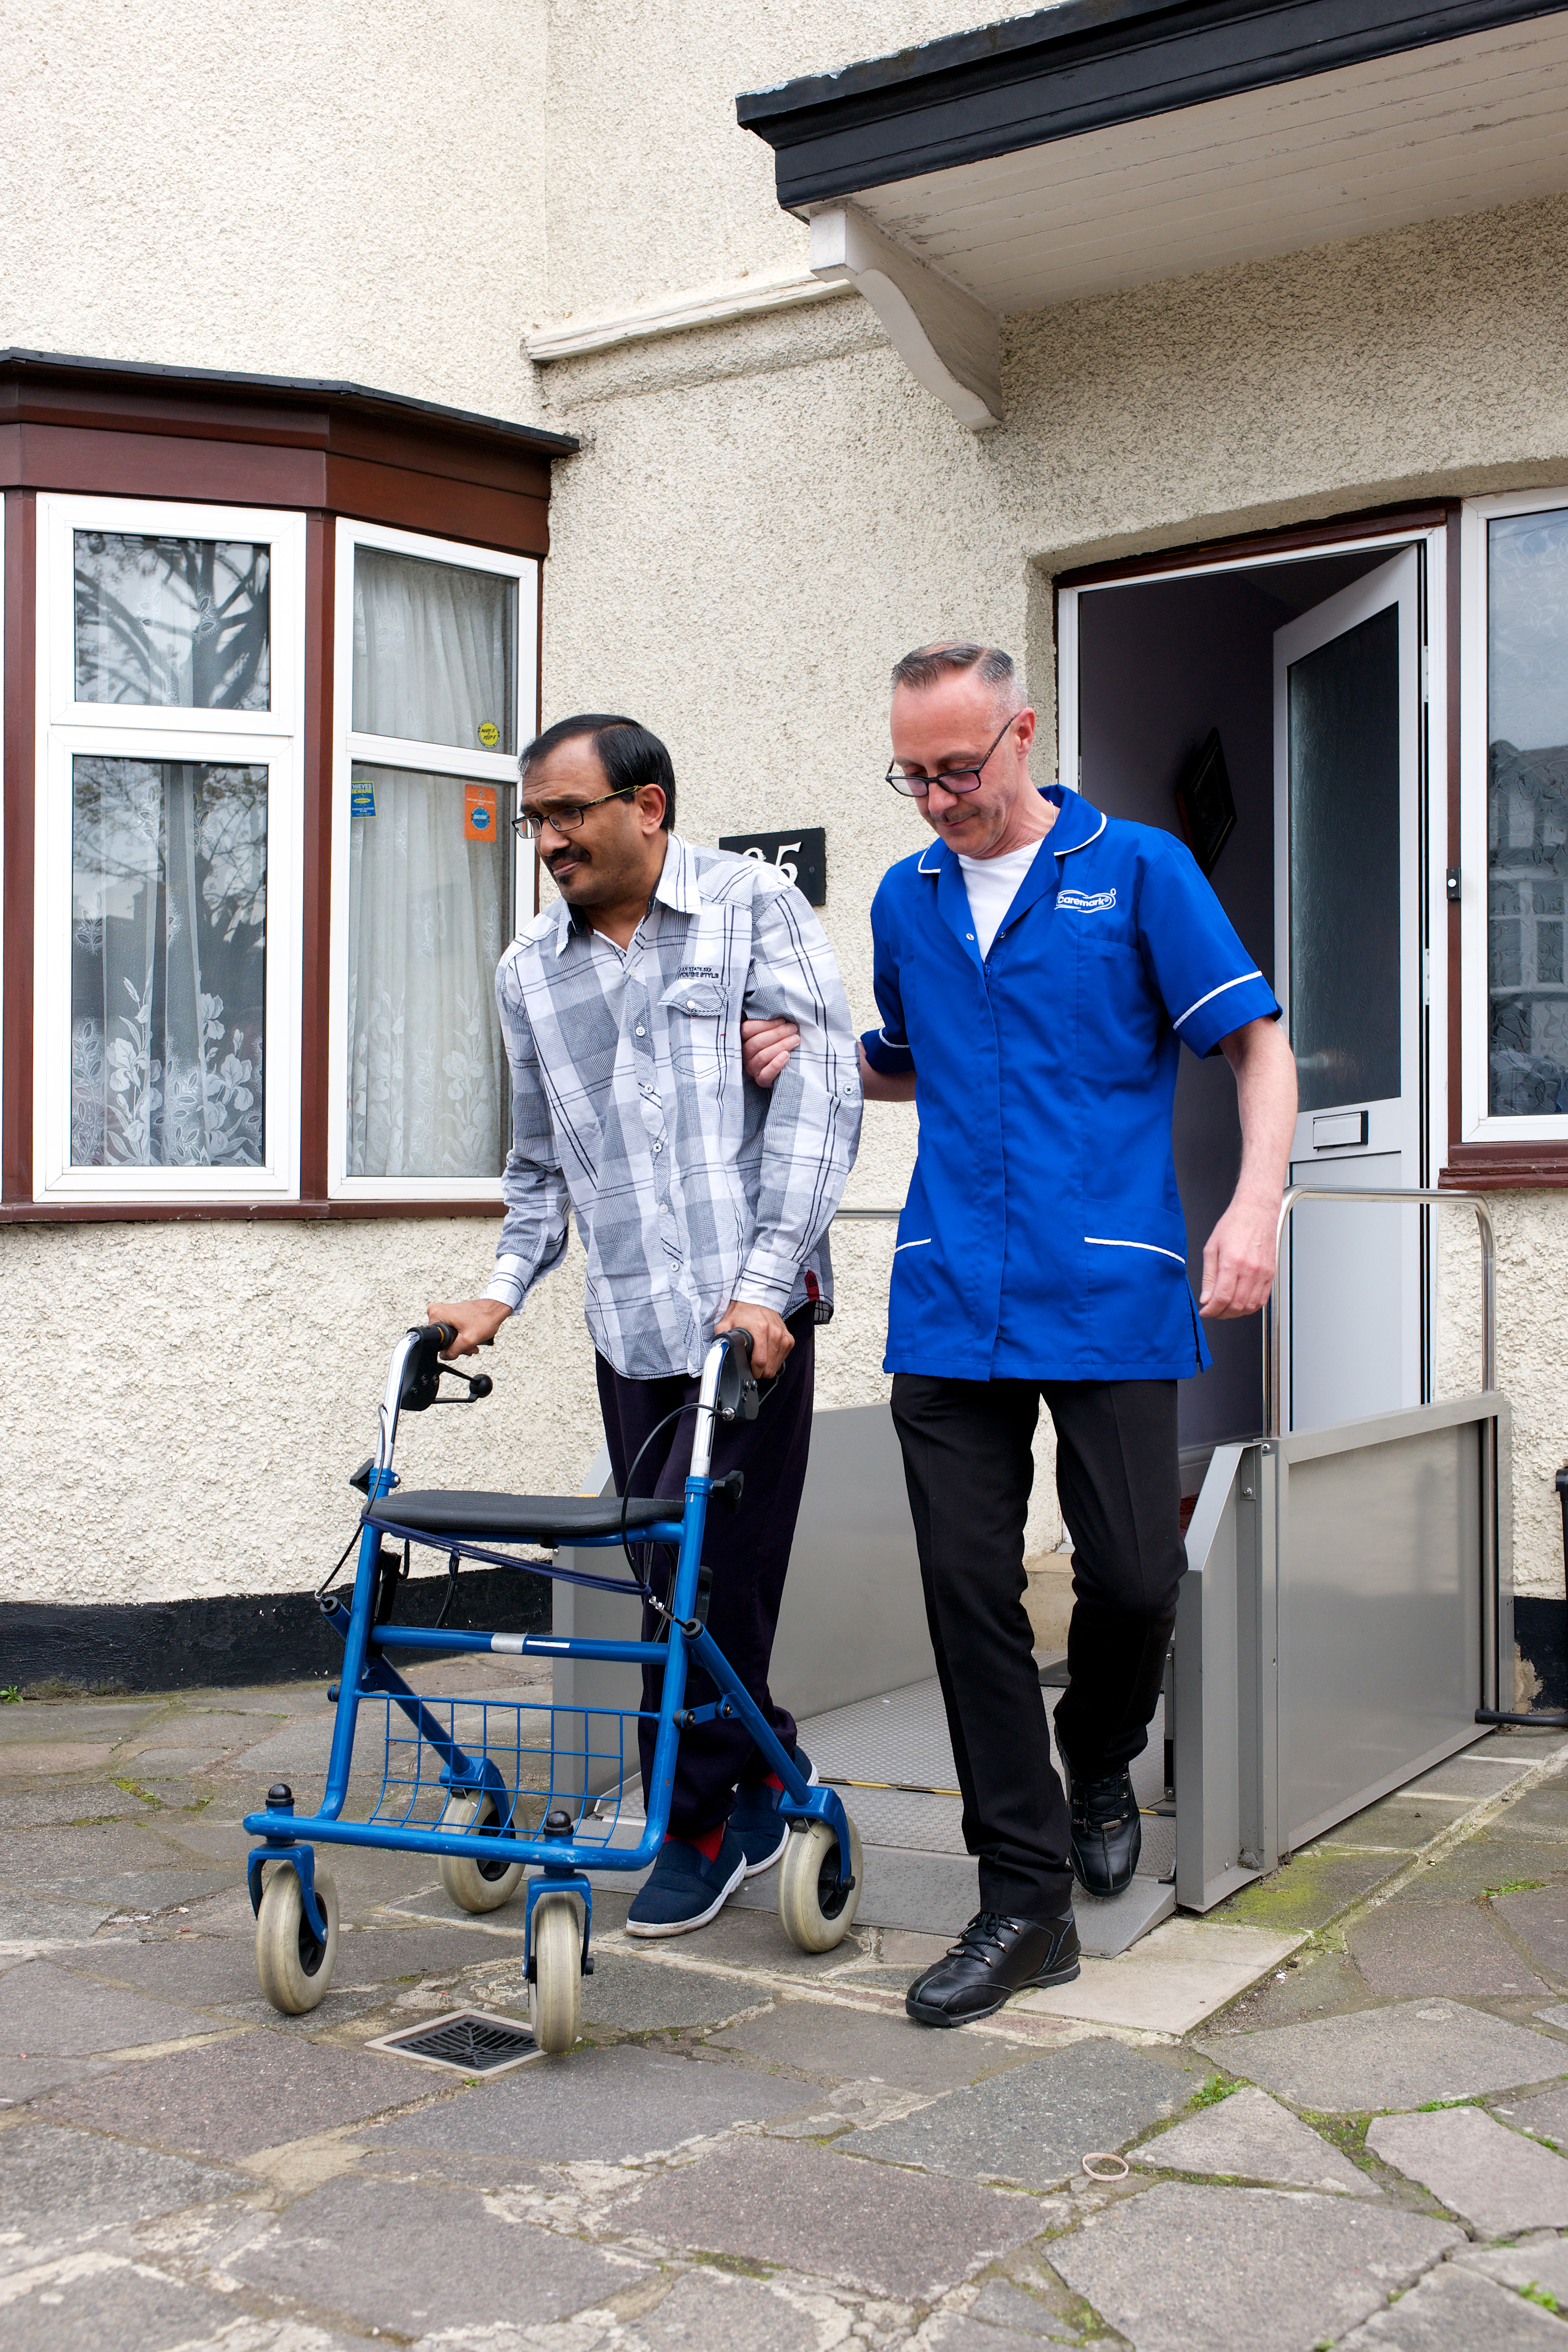 How to Personalise Home Care for People Living With Lifelong Conditions?